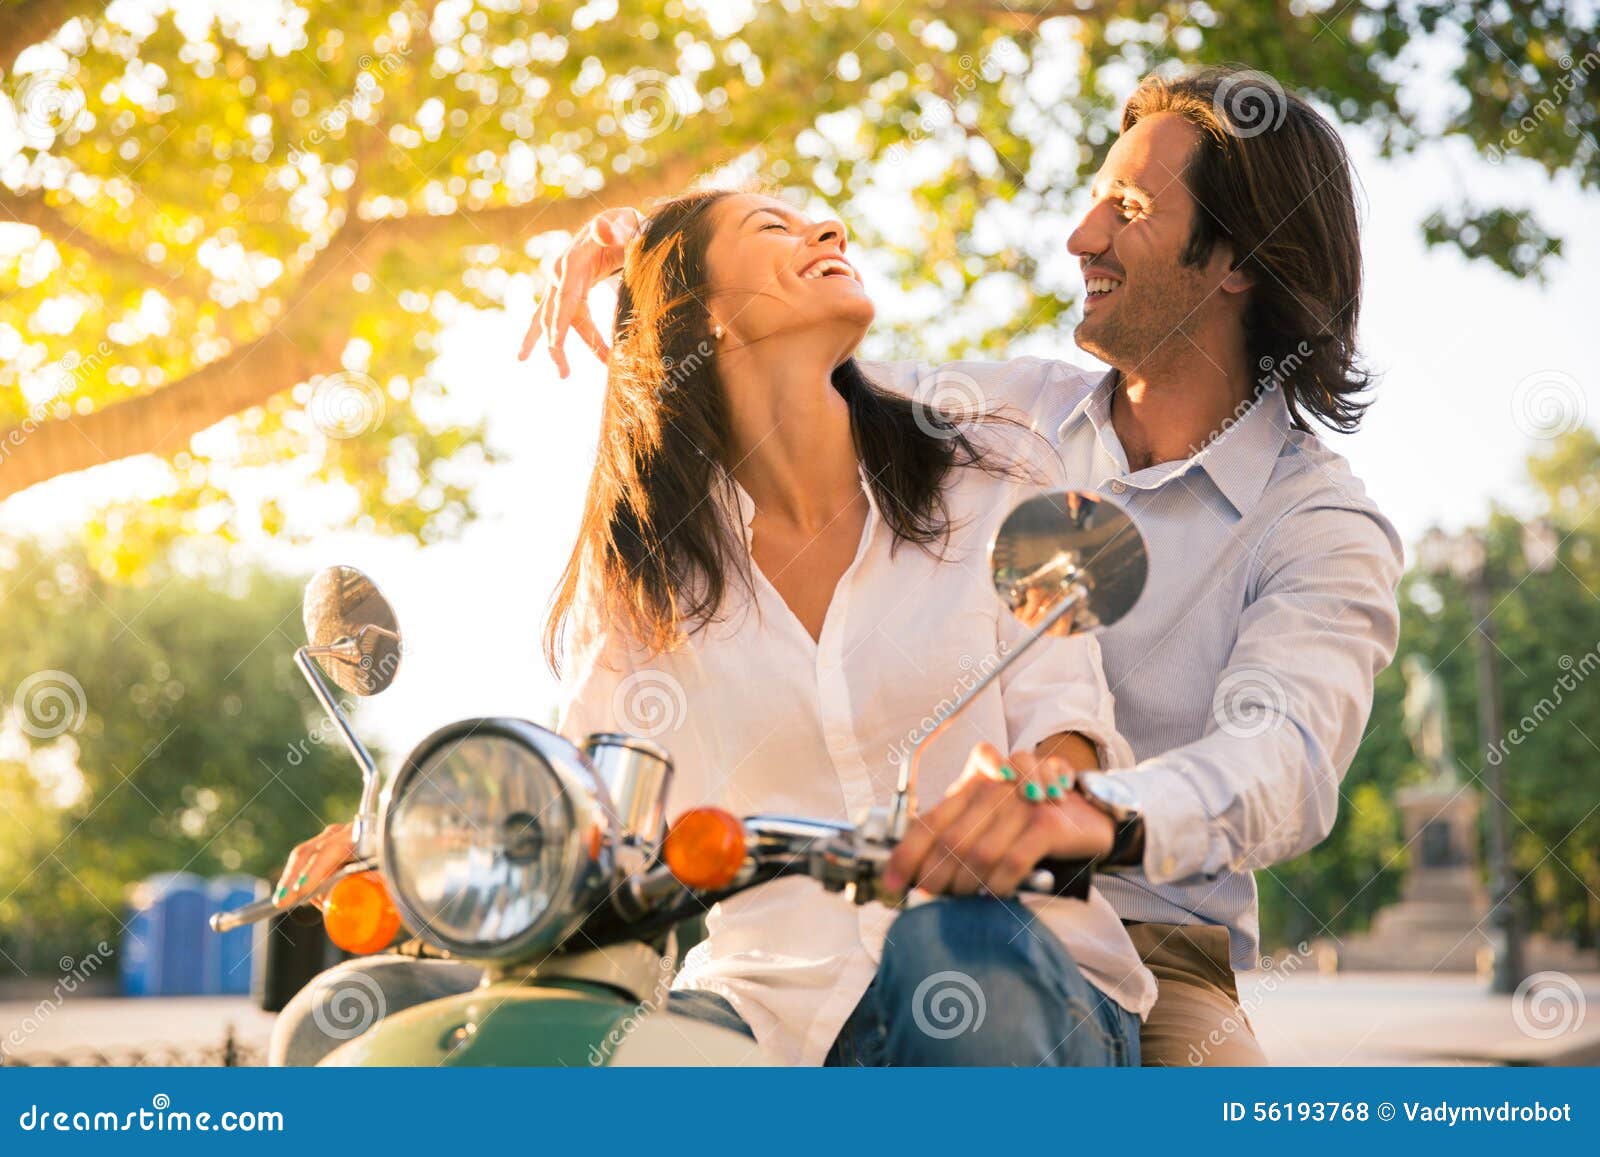 http://thumbs.dreamstime.com/z/laughing-european-couple-flirting-scooter-town-56193768.jpg